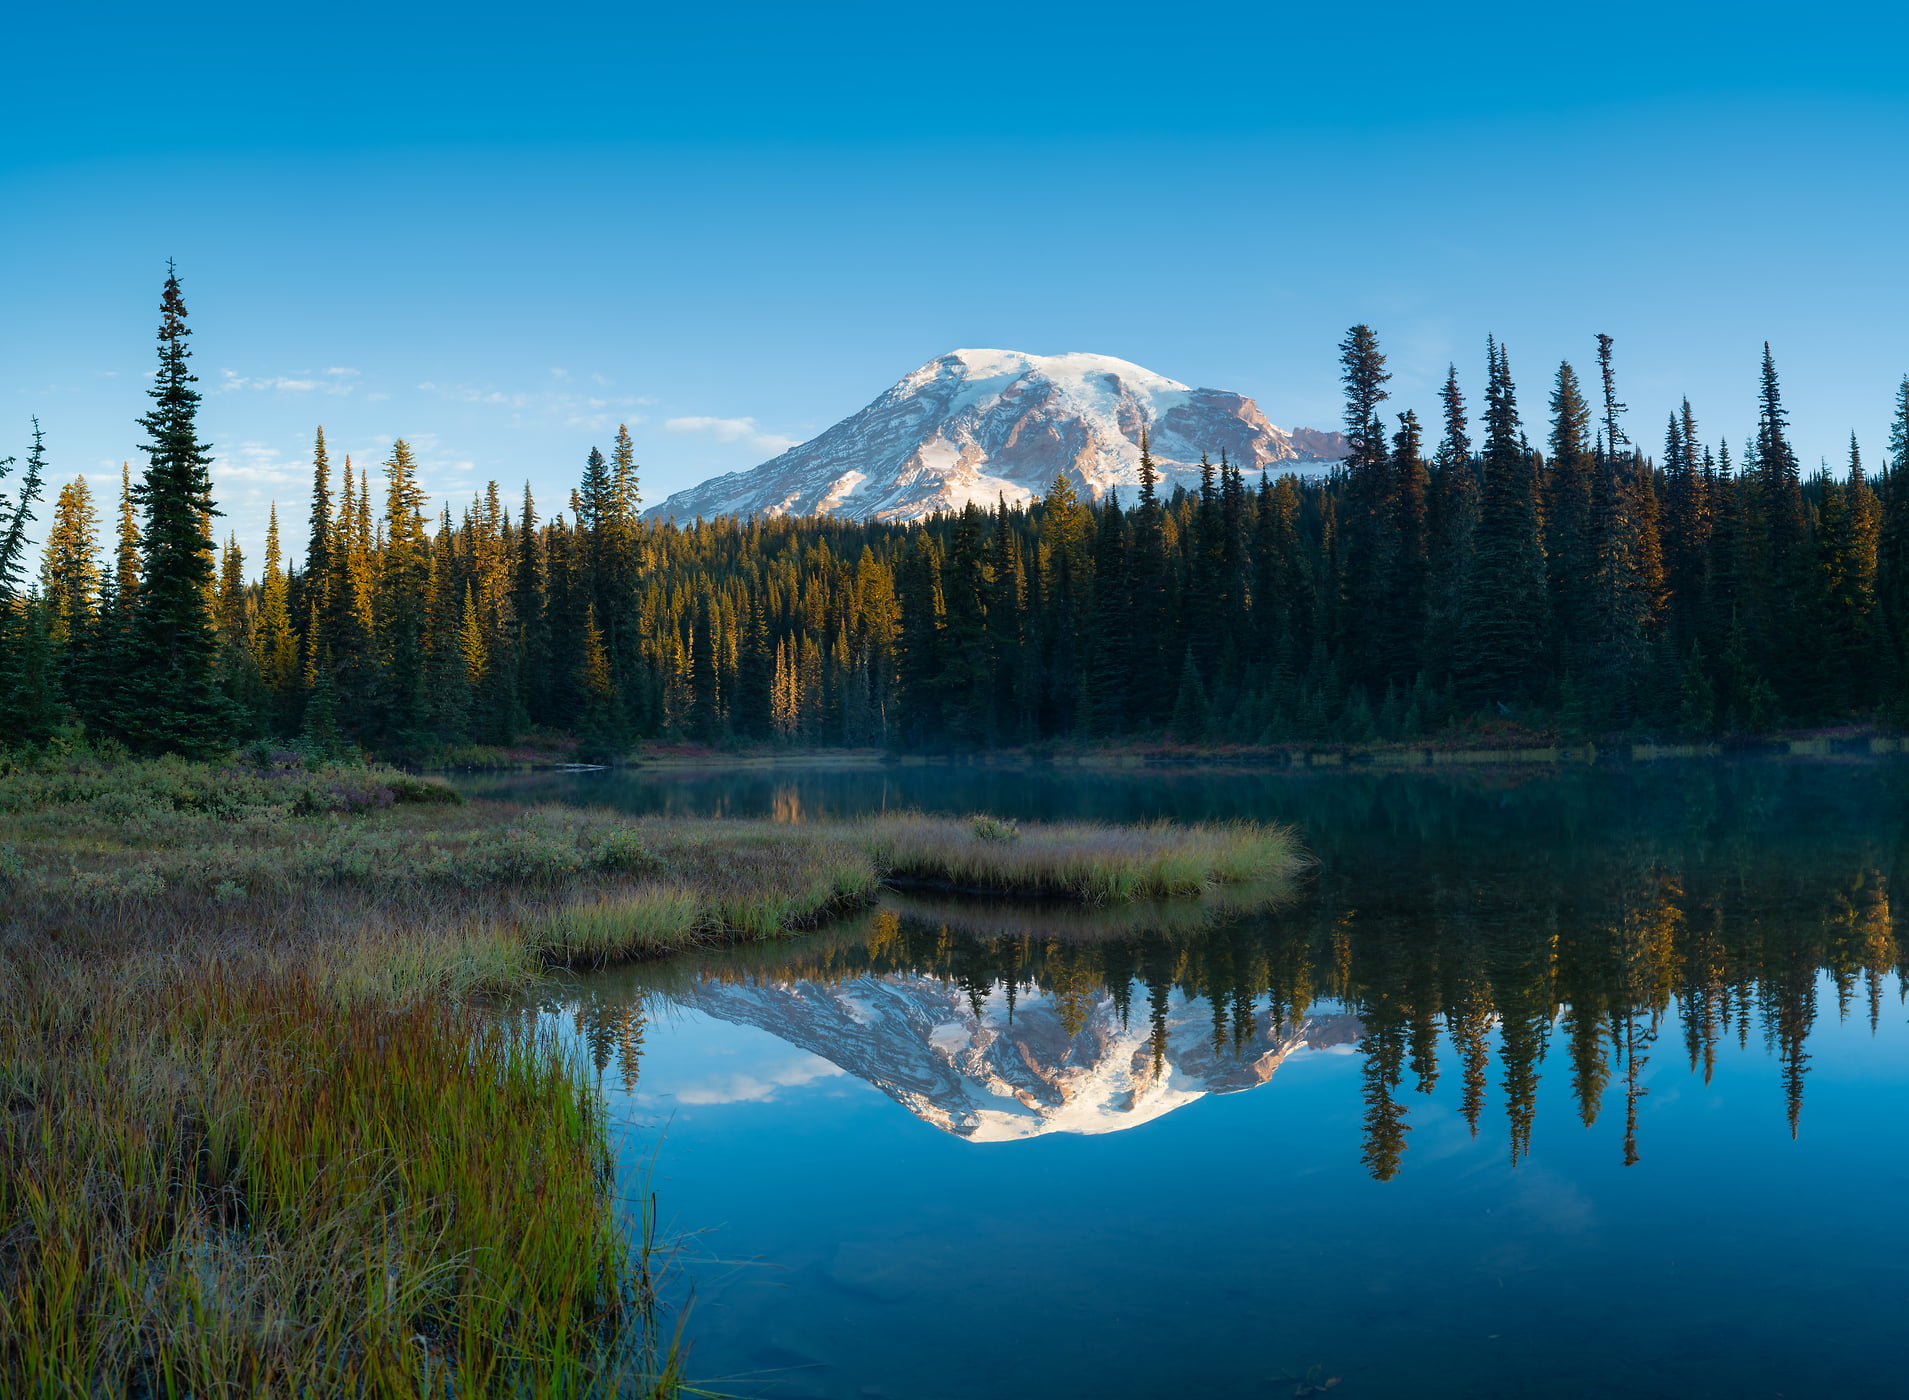 312 megapixels! A very high resolution, large-format VAST photo print of a mountain reflected in a lake; landscape photograph created by Greg Probst at Reflection Lake in Mount Rainier National Park, Washington.